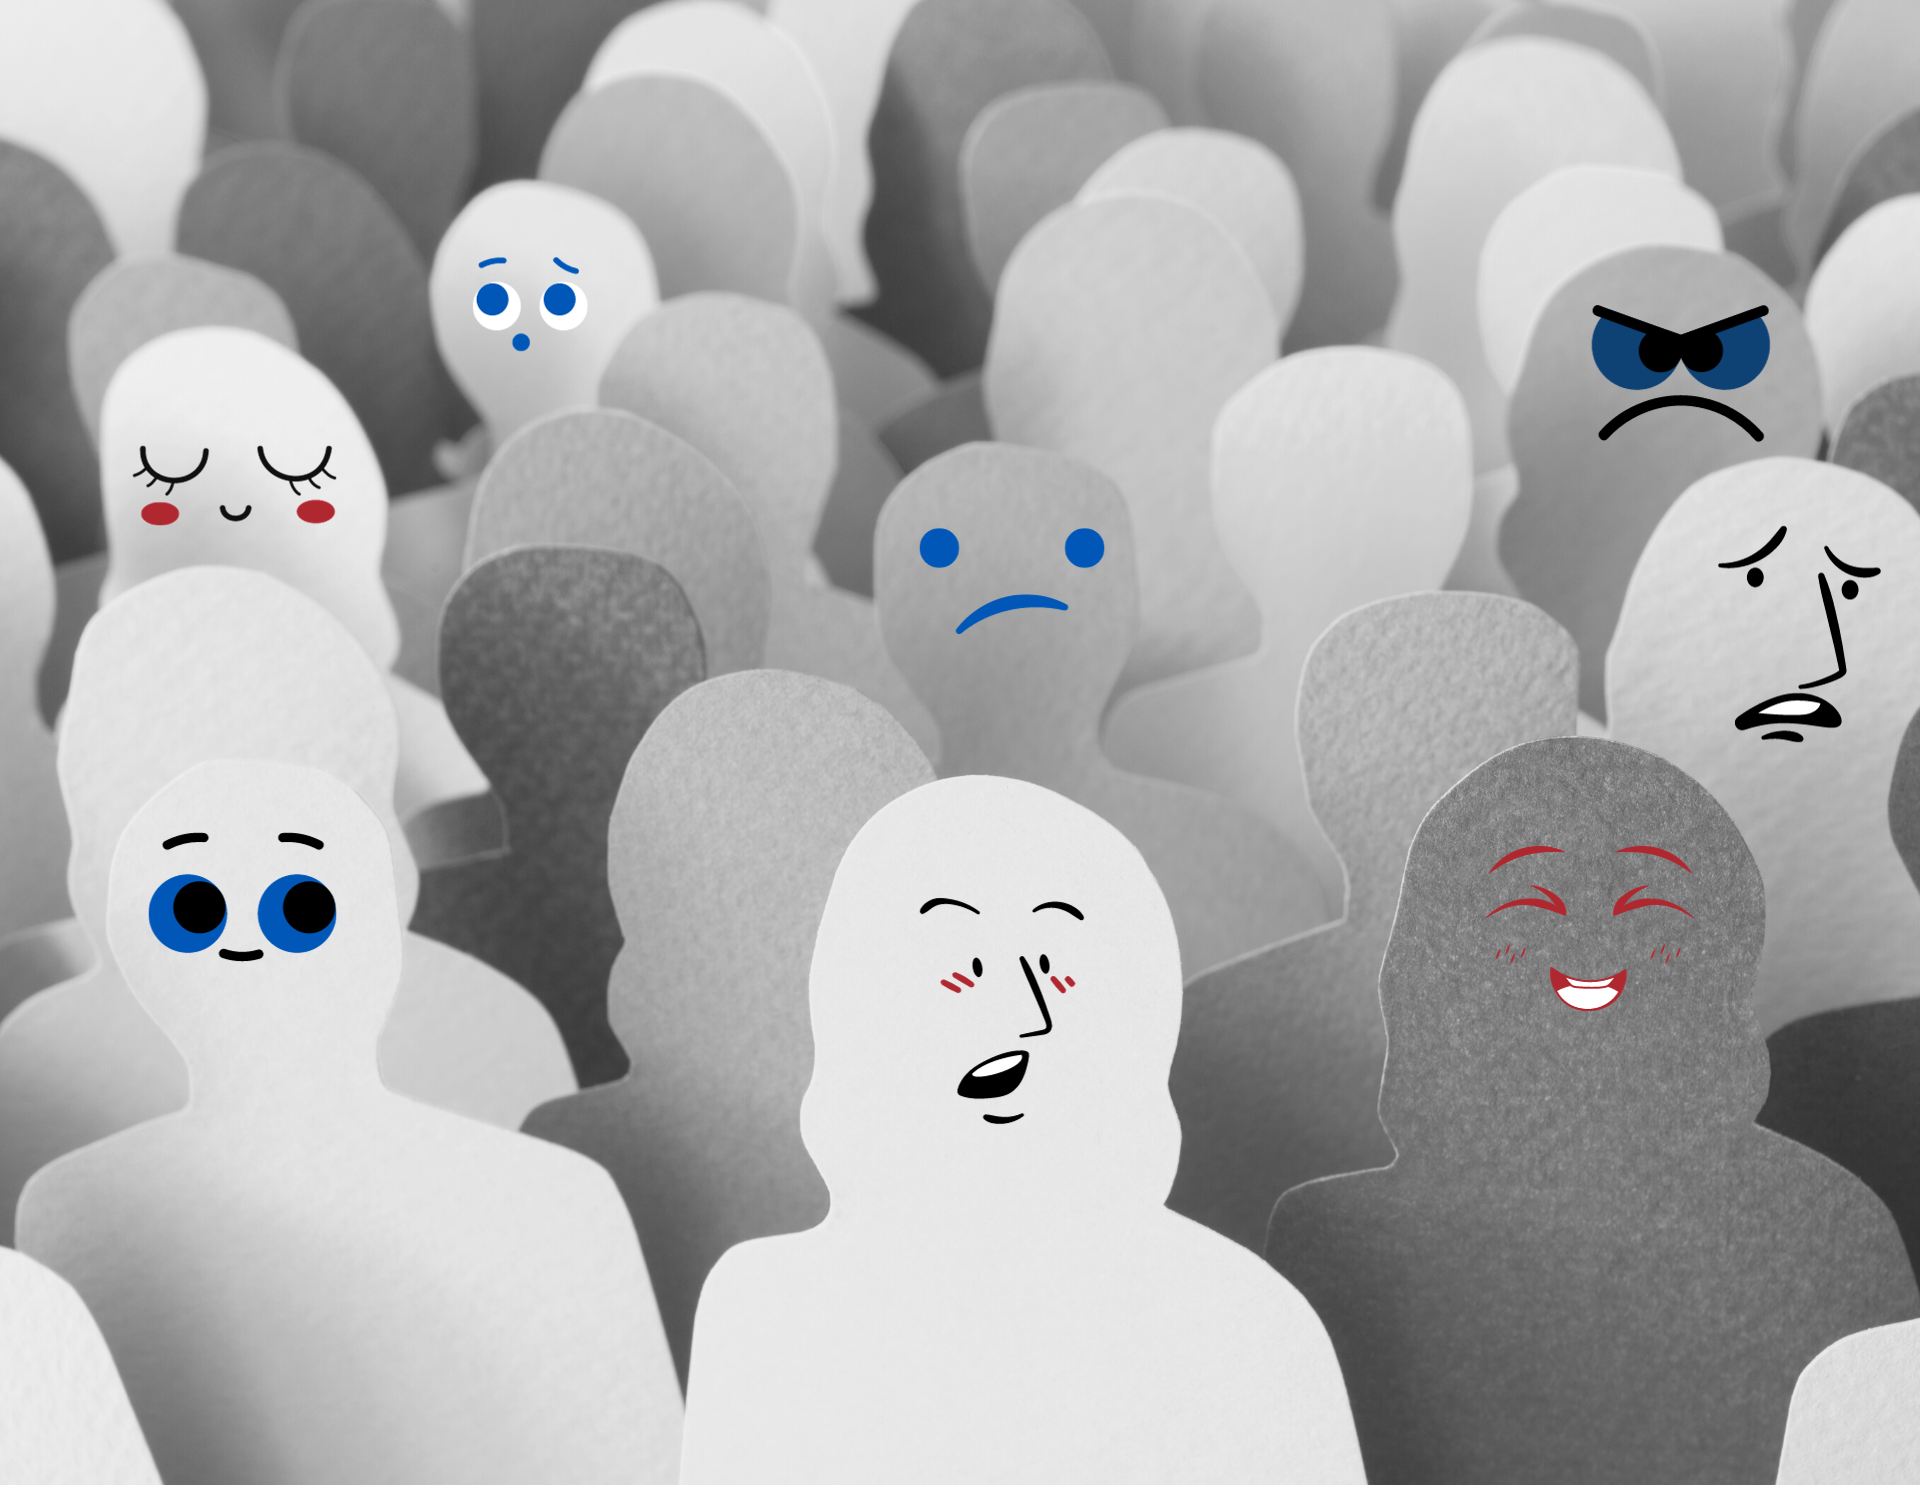 Outline of people's heads and shoulders standing together in a crowd. Cartoon expressions overlaid on their blank faces